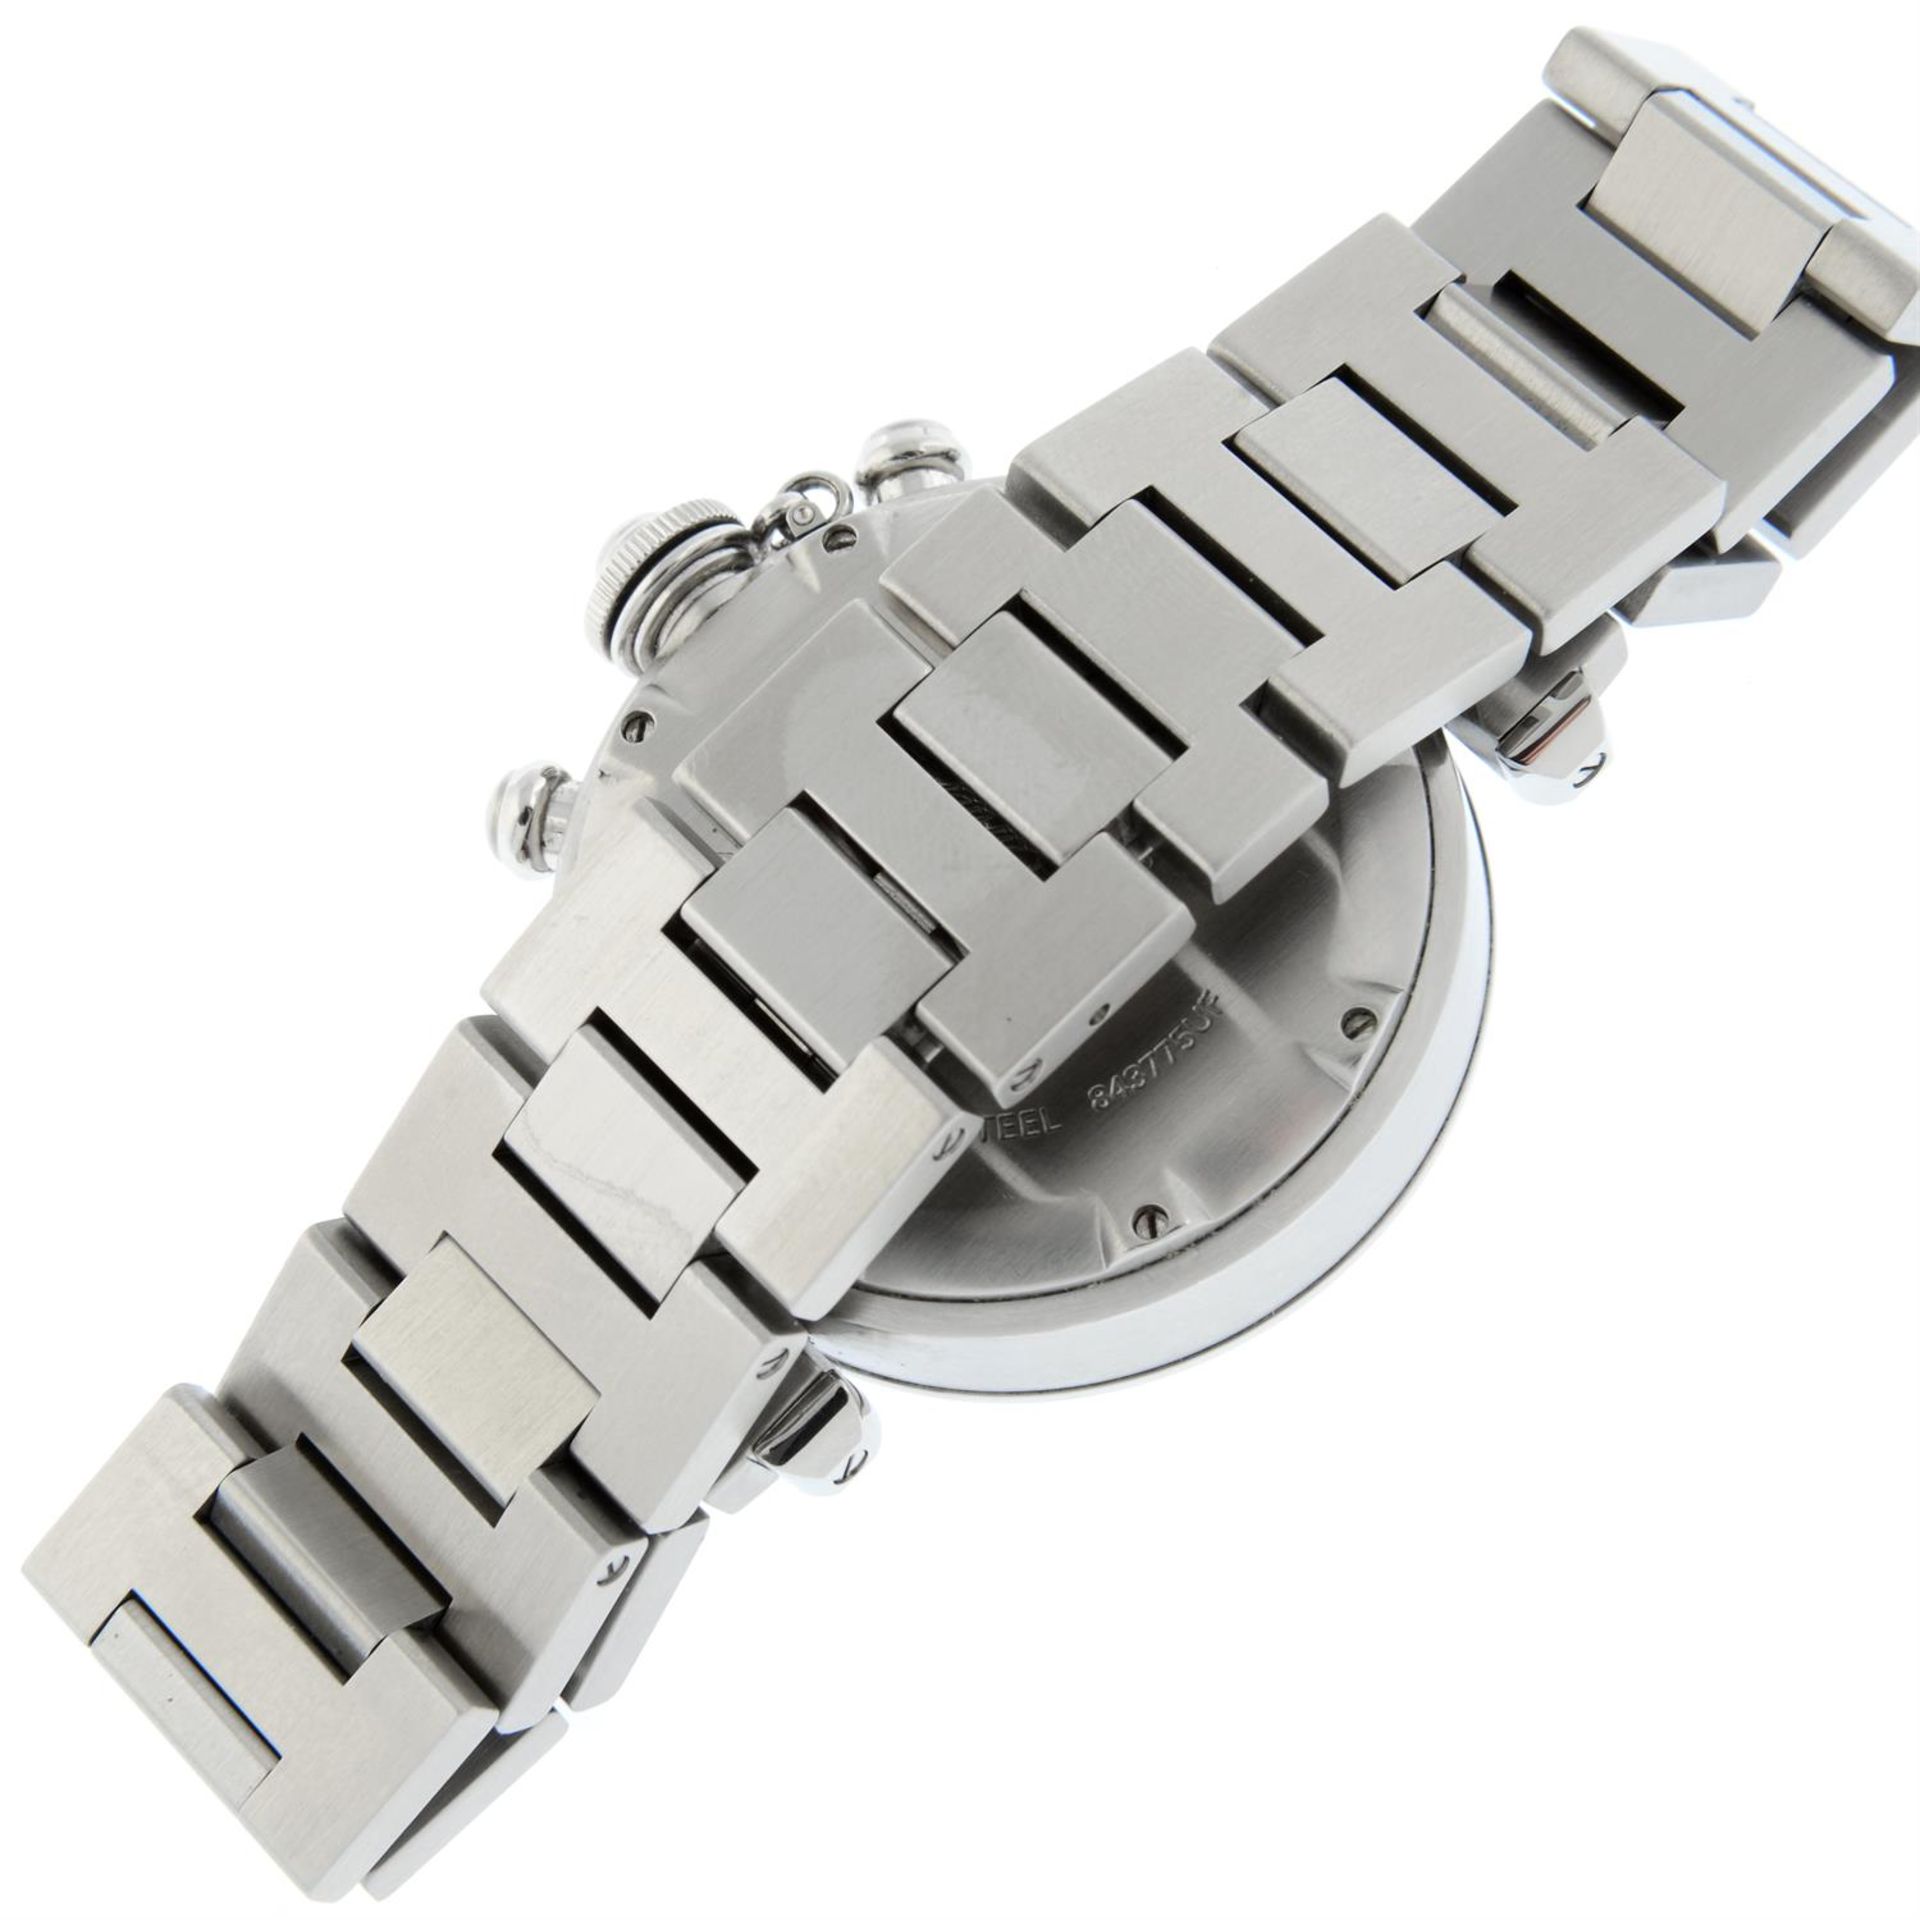 CARTIER - a stainless steel Pasha chronograph bracelet watch, 41mm. - Image 2 of 5